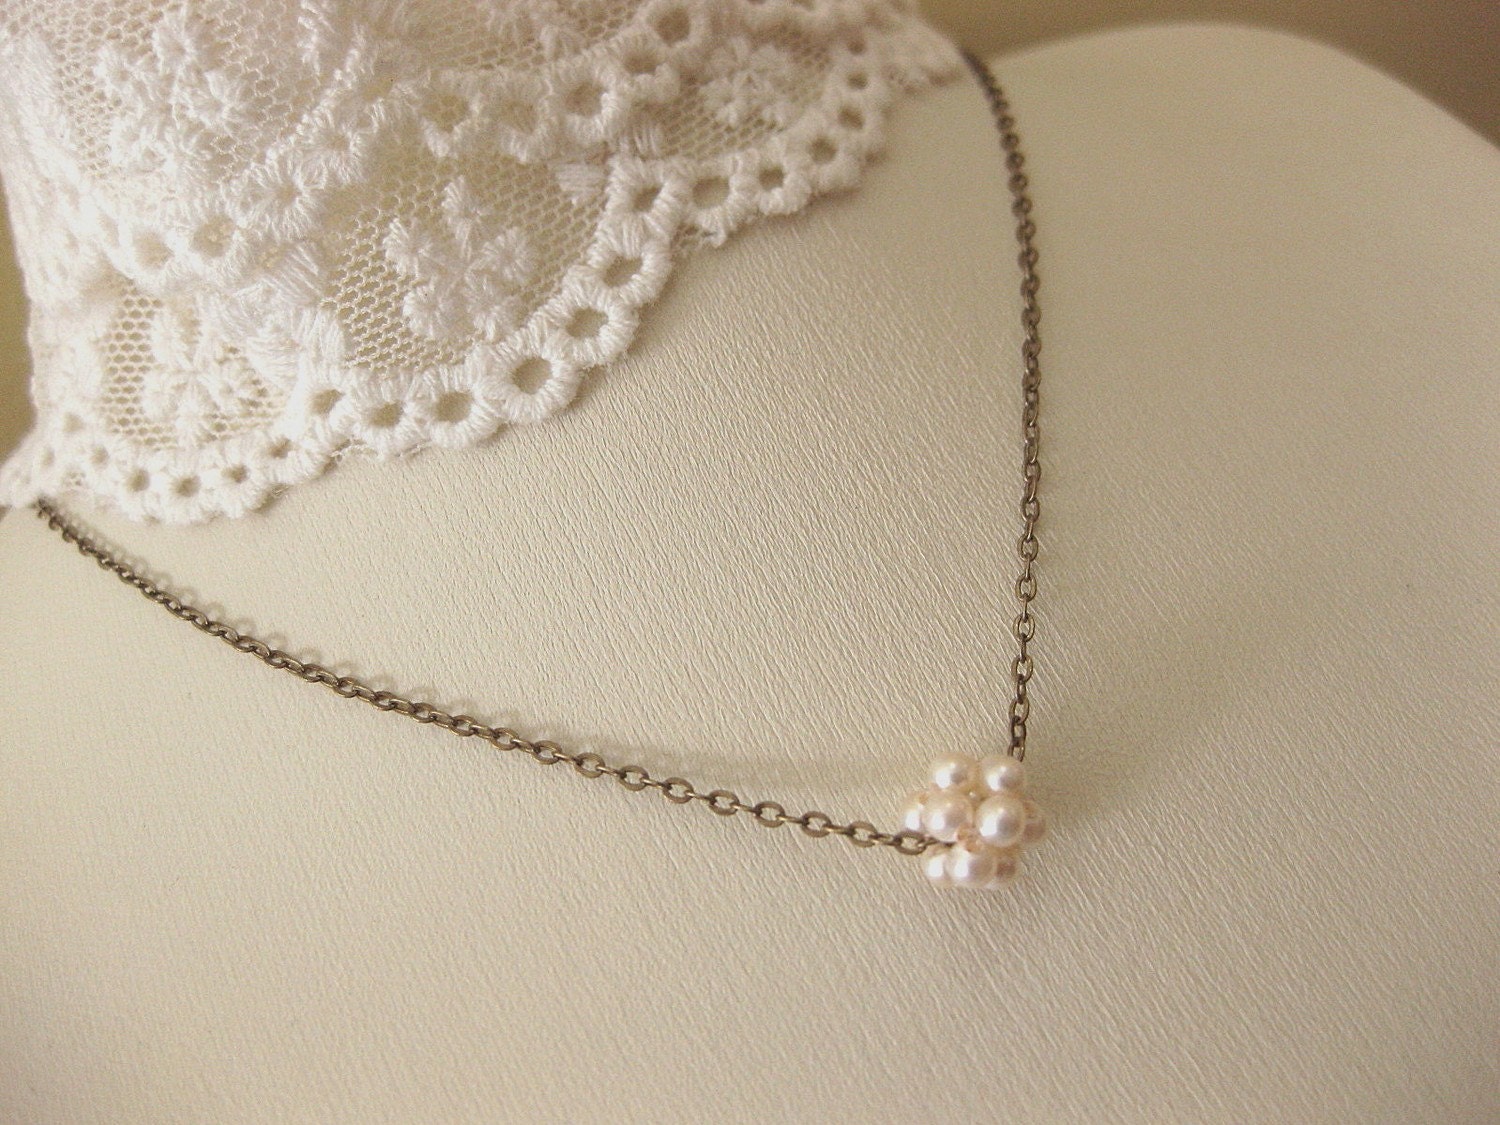 Tiny bubbles. Sweet necklace. Simple. Classic. Choose your color.